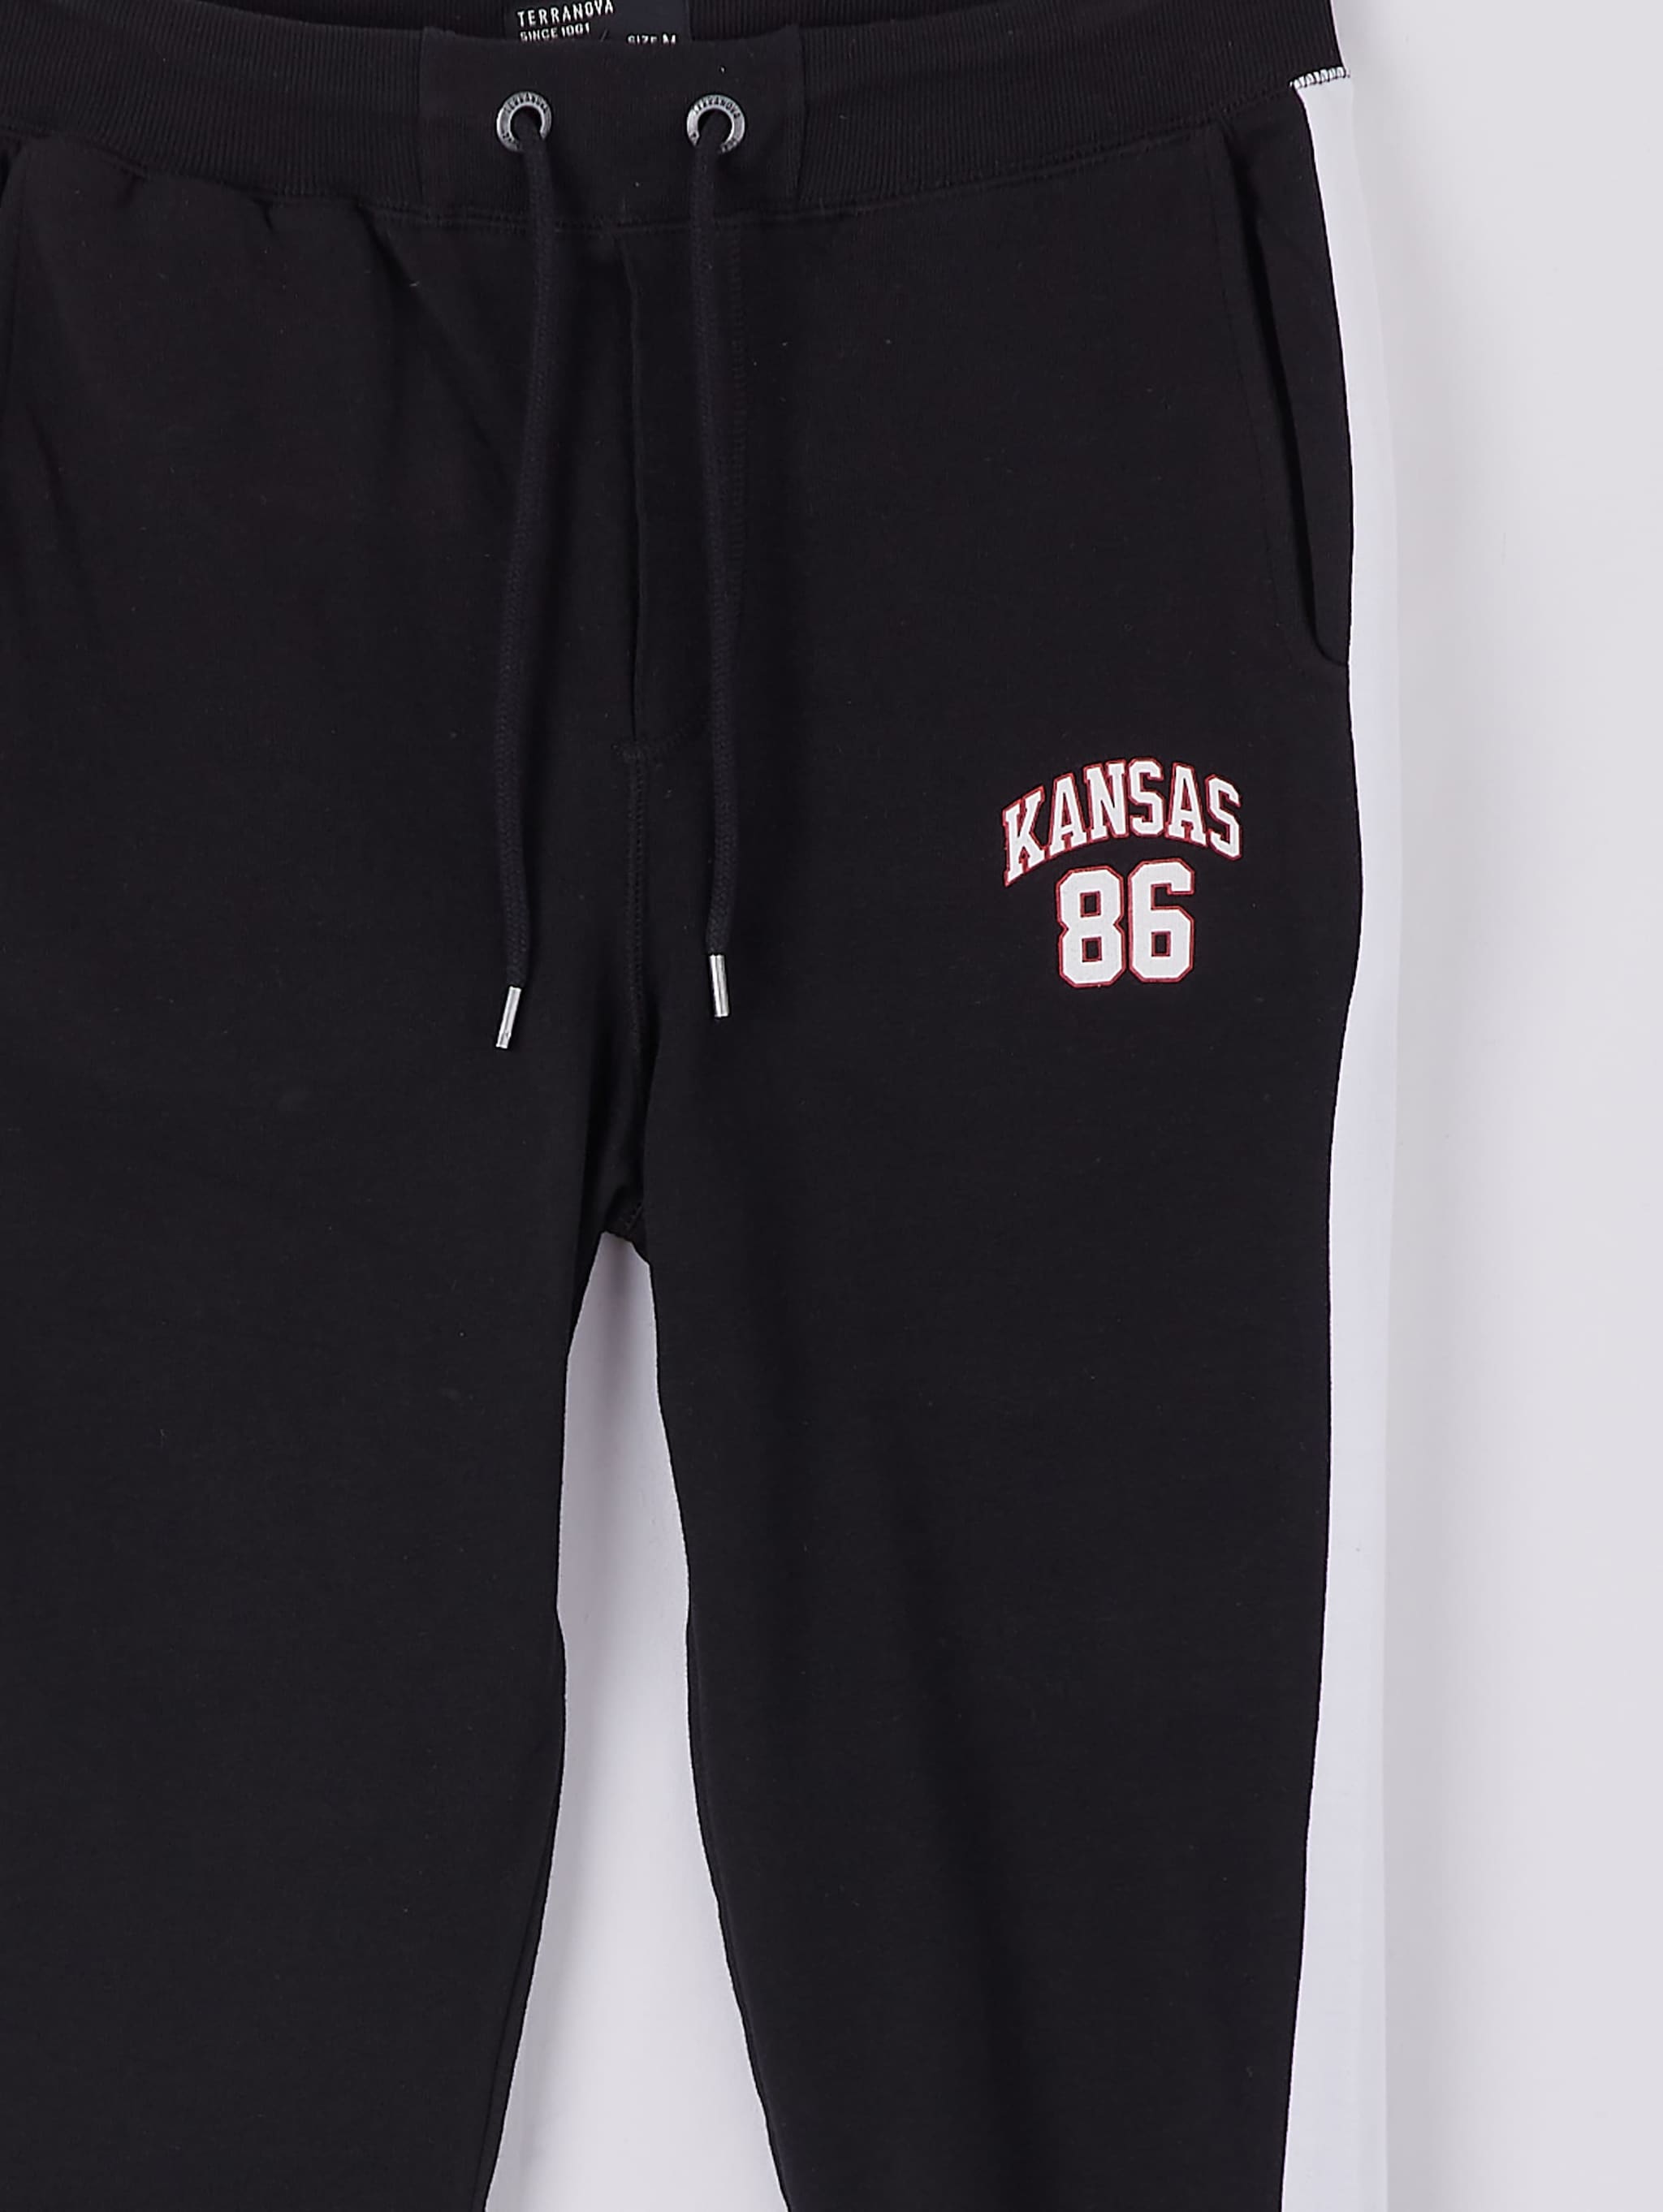 black joggers with side stripe